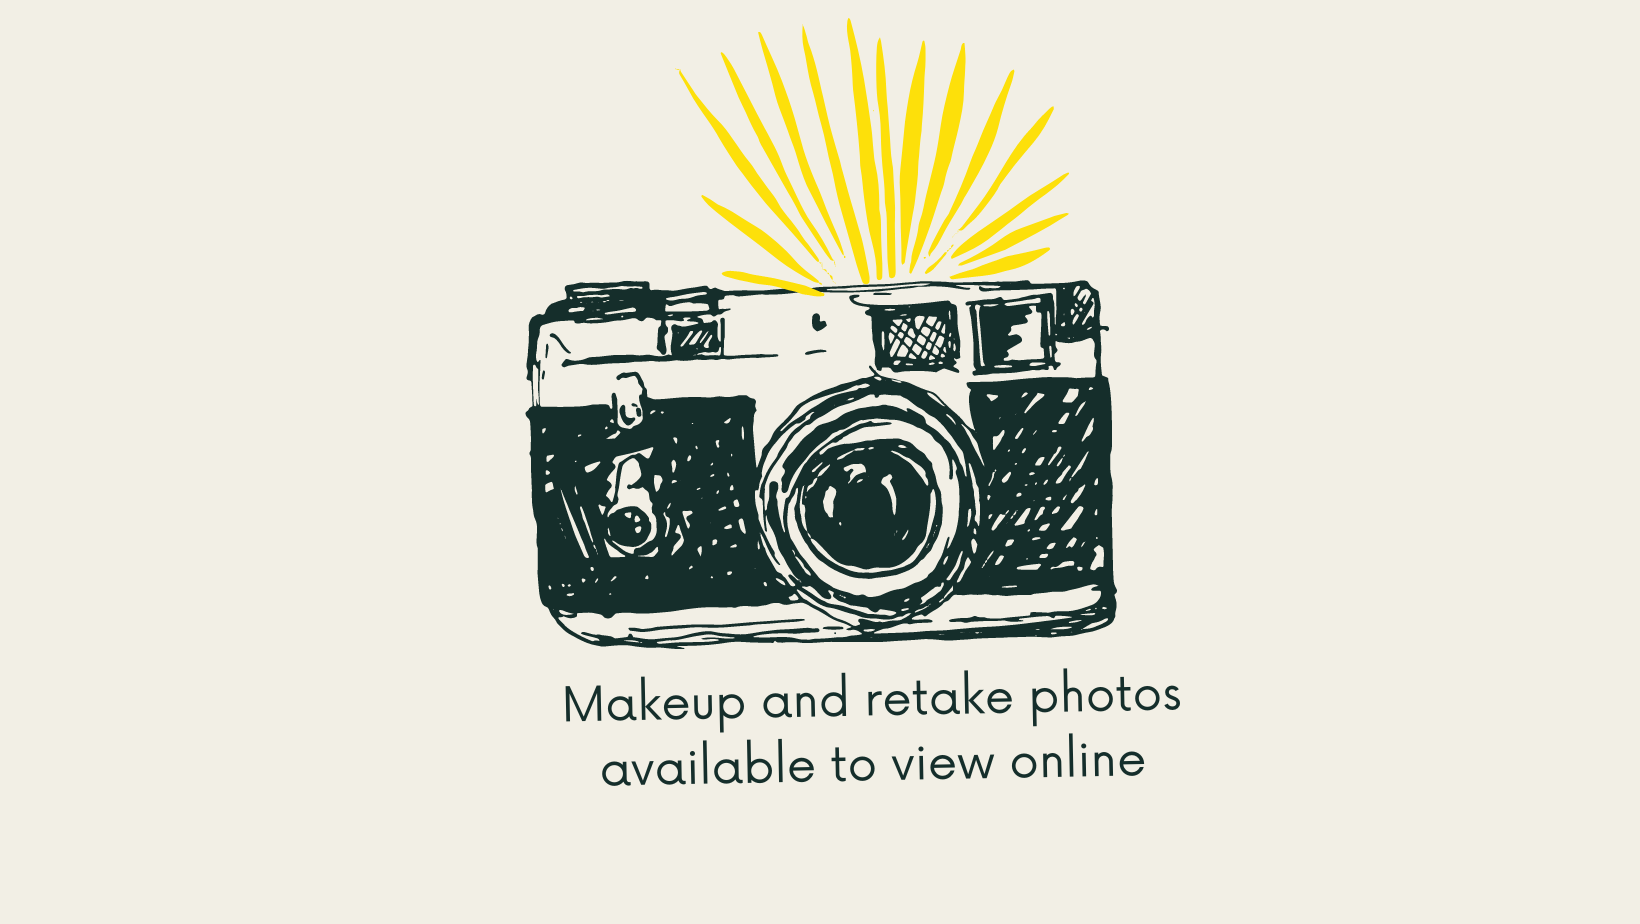 Makeup and retake photos available to view online